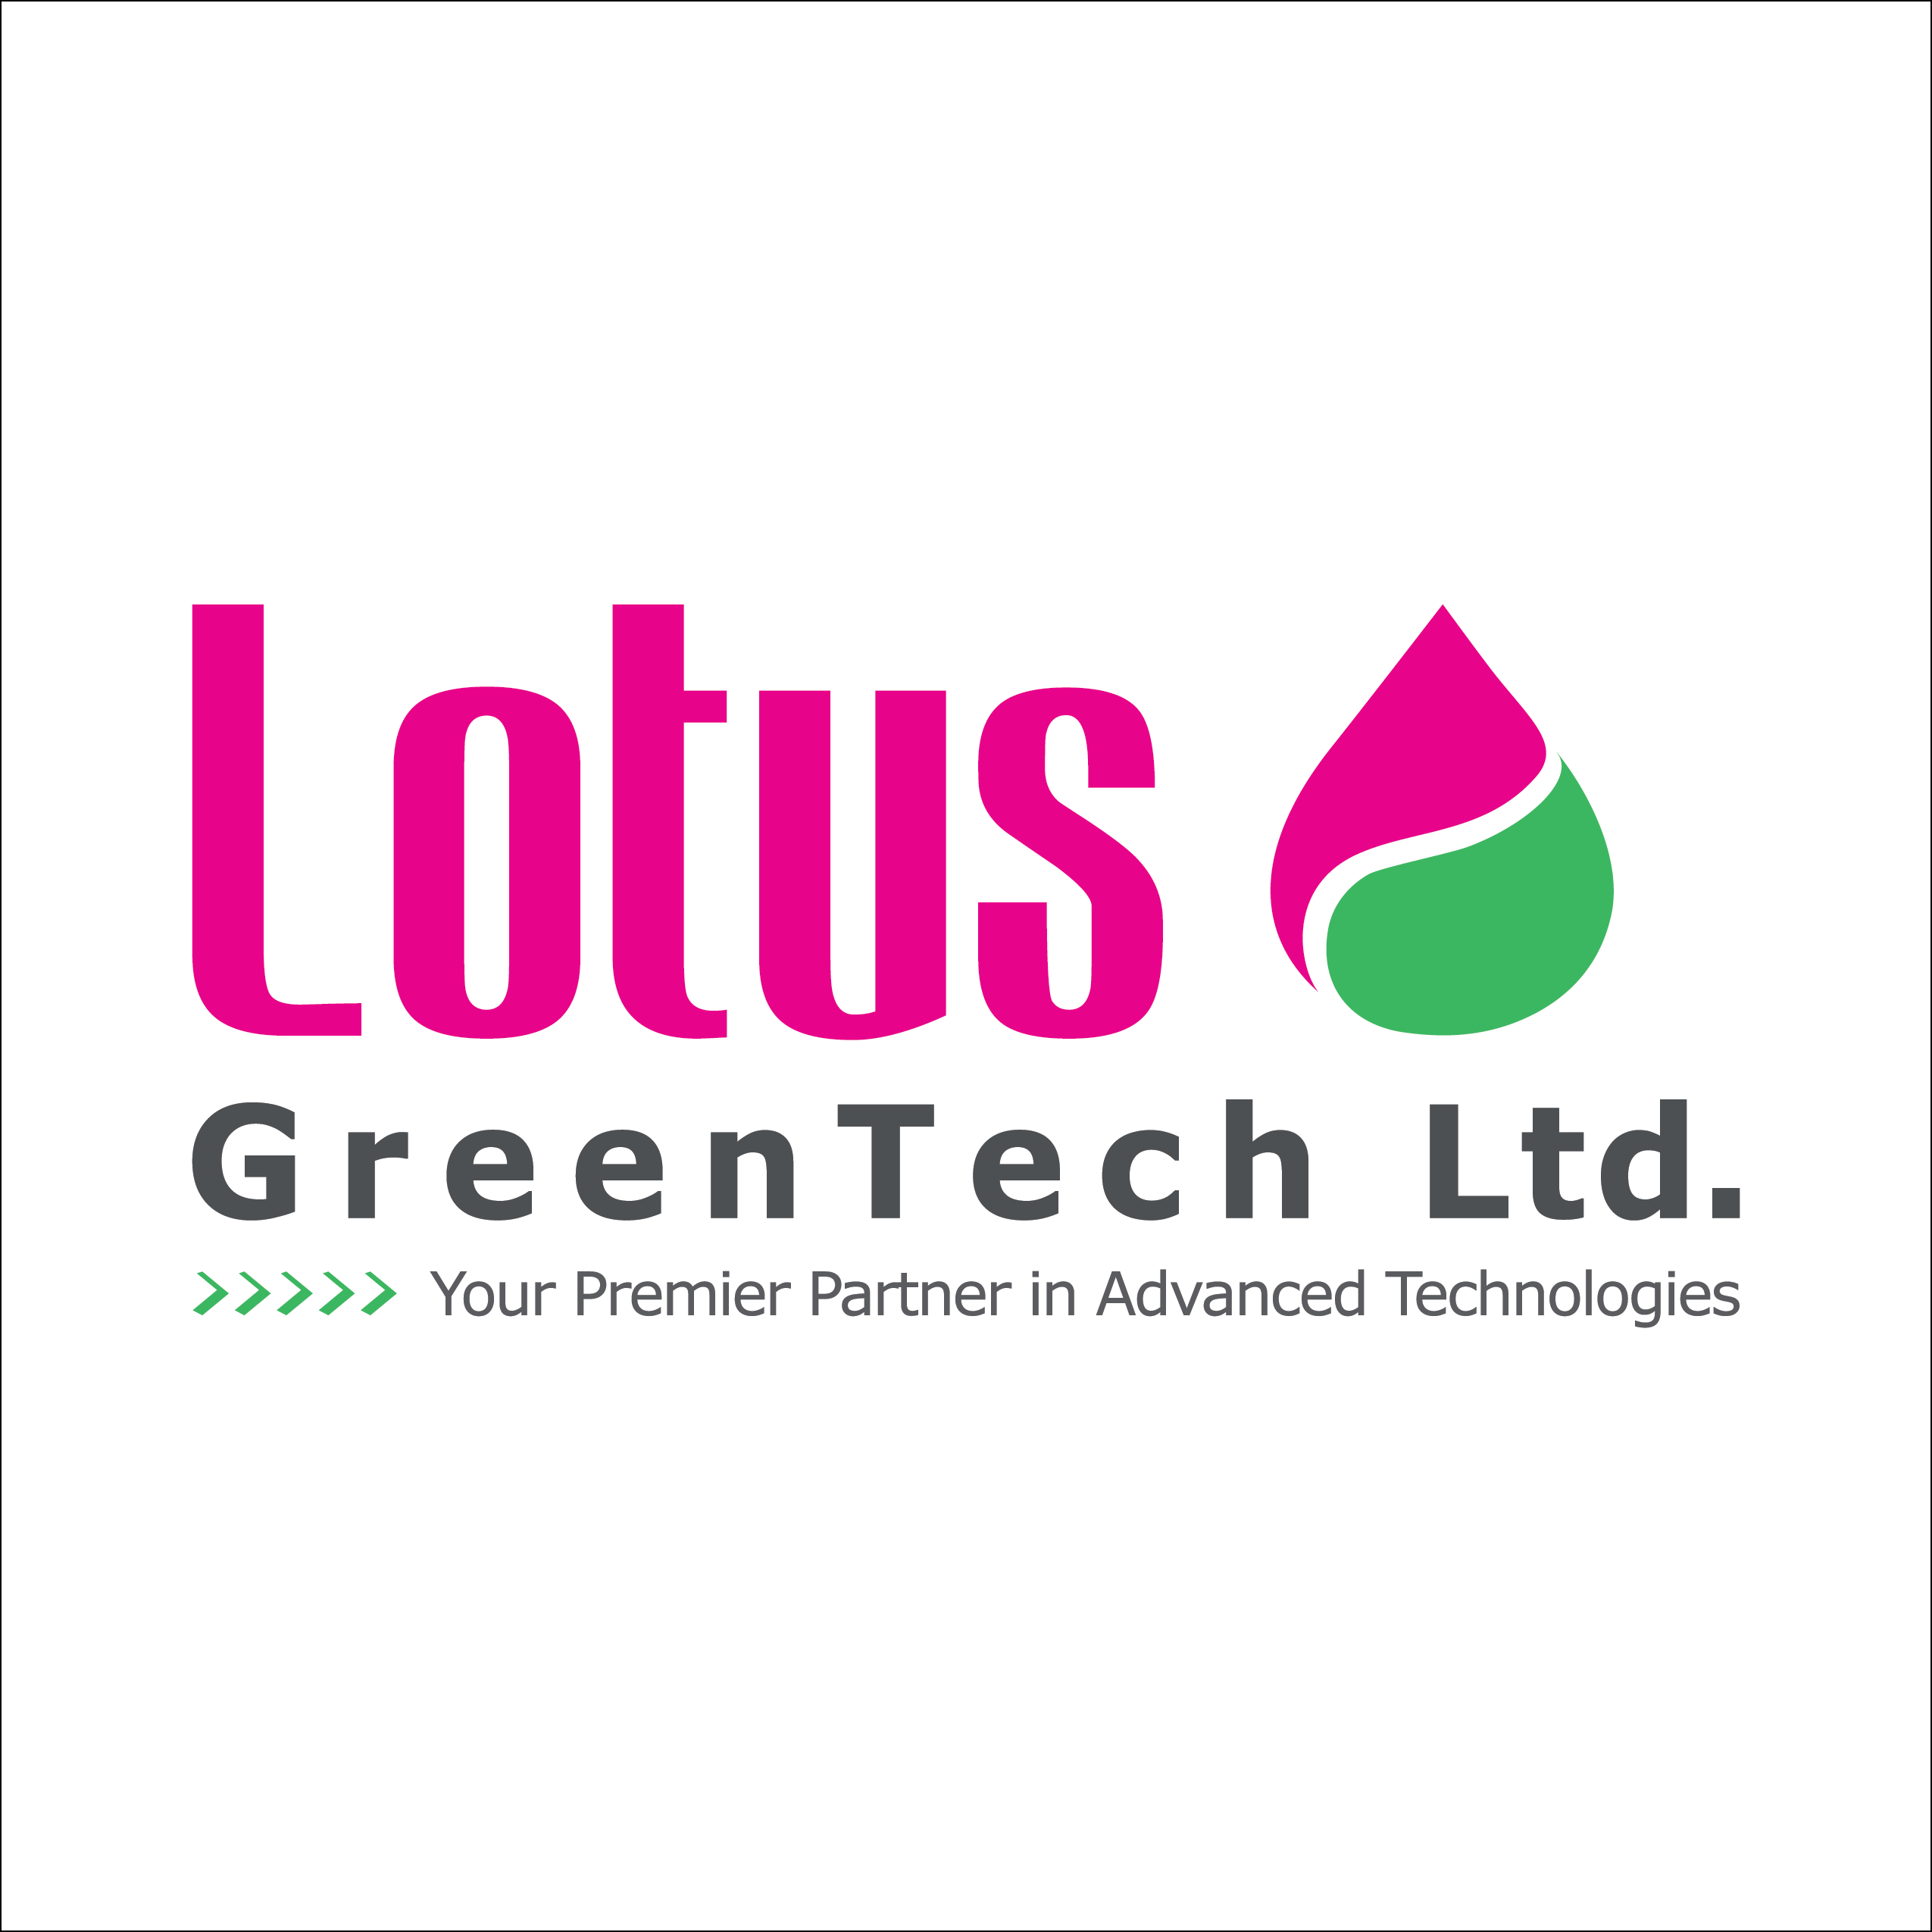 LOTUS GREEN TECHNOLOGY COMPANY LIMITED